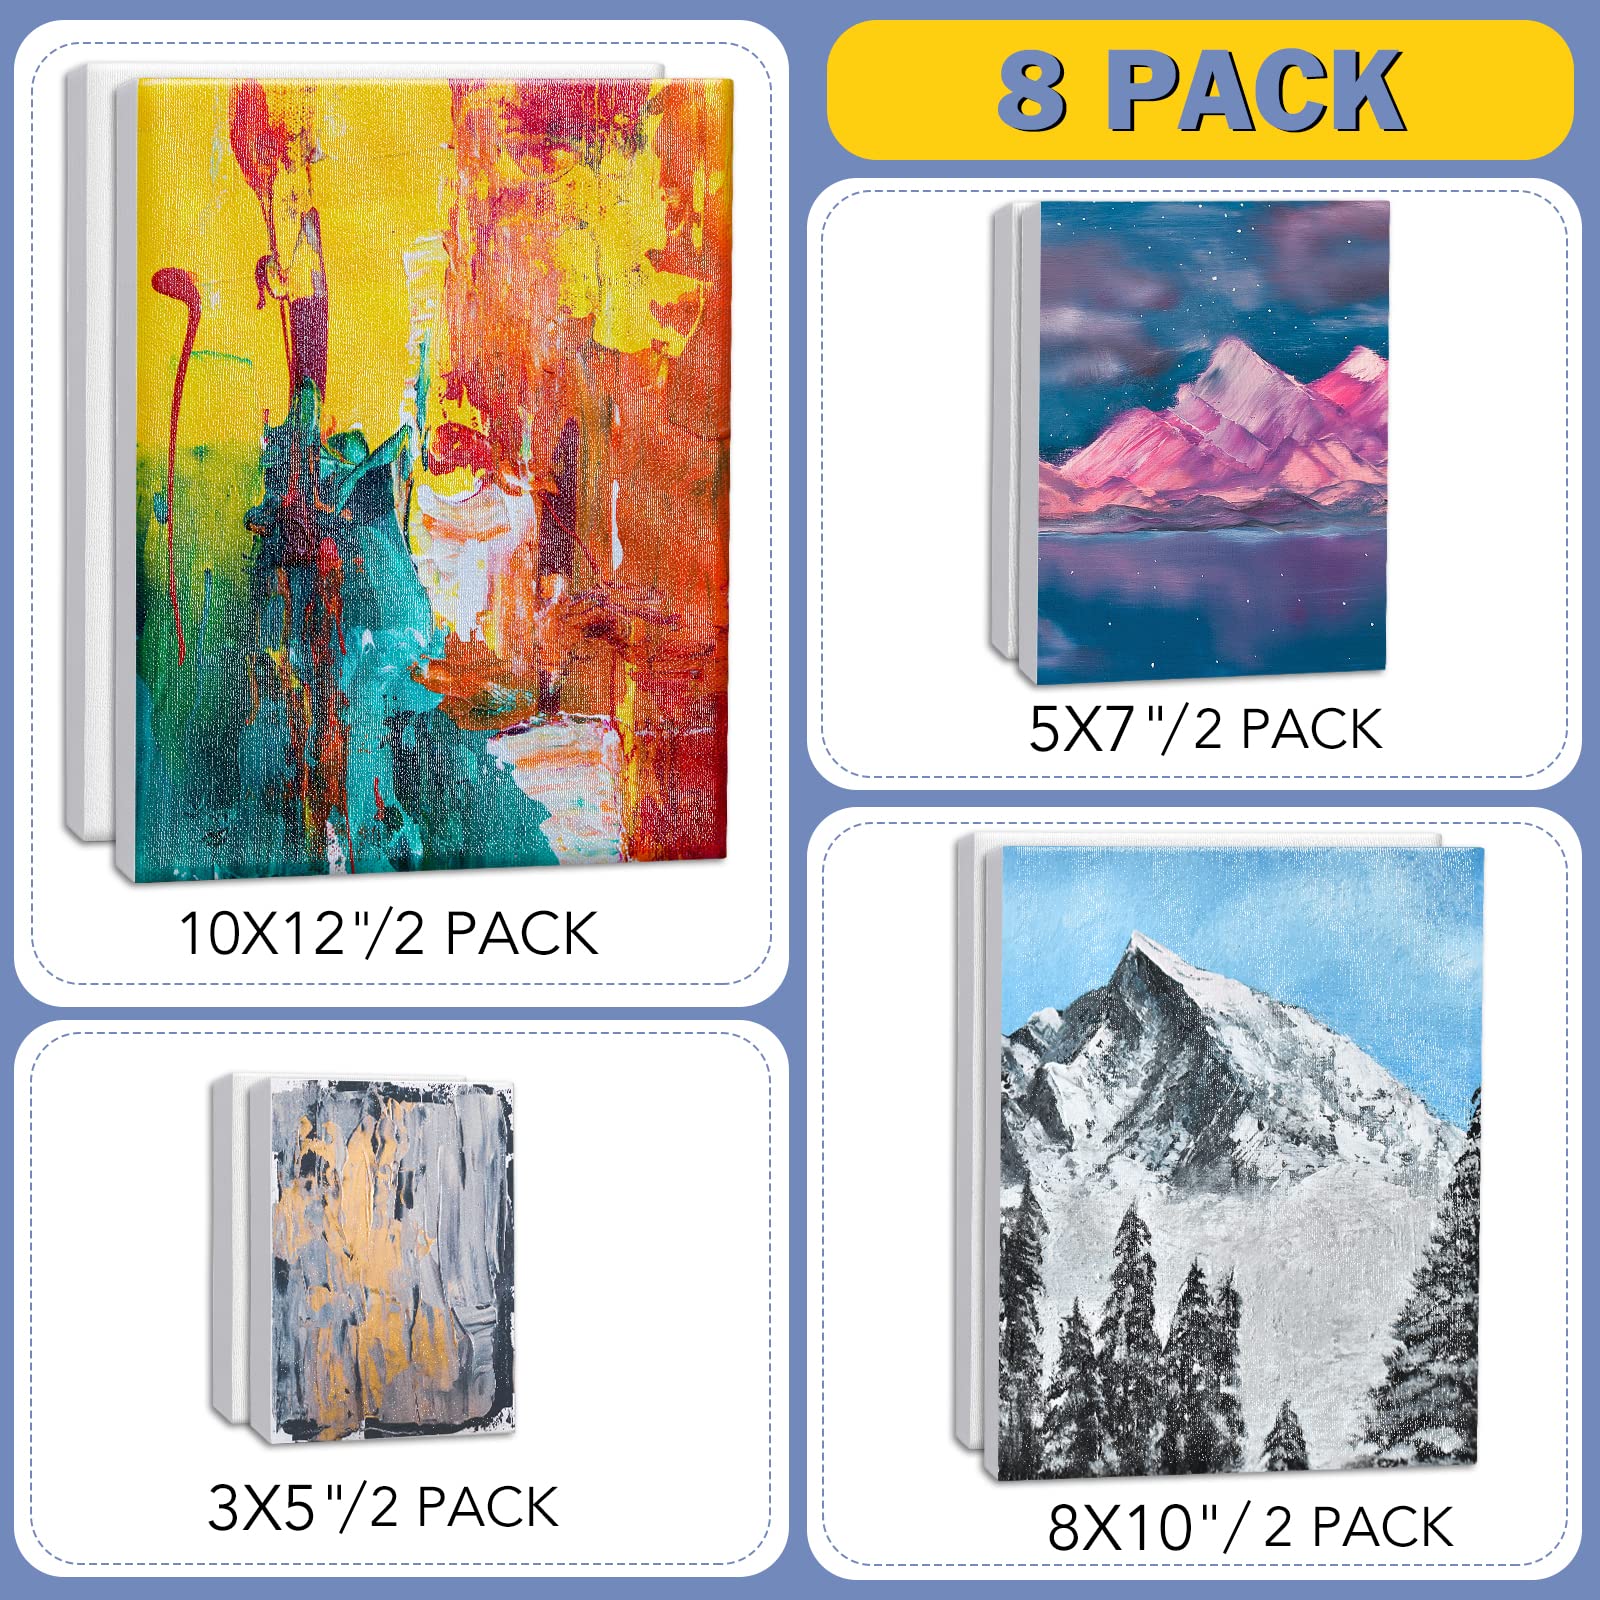 Stretched Canvases for Painting, 8PCS Multi Pack Canvas 3×5”, 5×7”, 8×10”, 10×12”(2 of Each), Acid-Free Wood Frame Blank Canvas, Art Canvas Pre Primed for Acrylic, Oil Painting, Tempera Paintings.